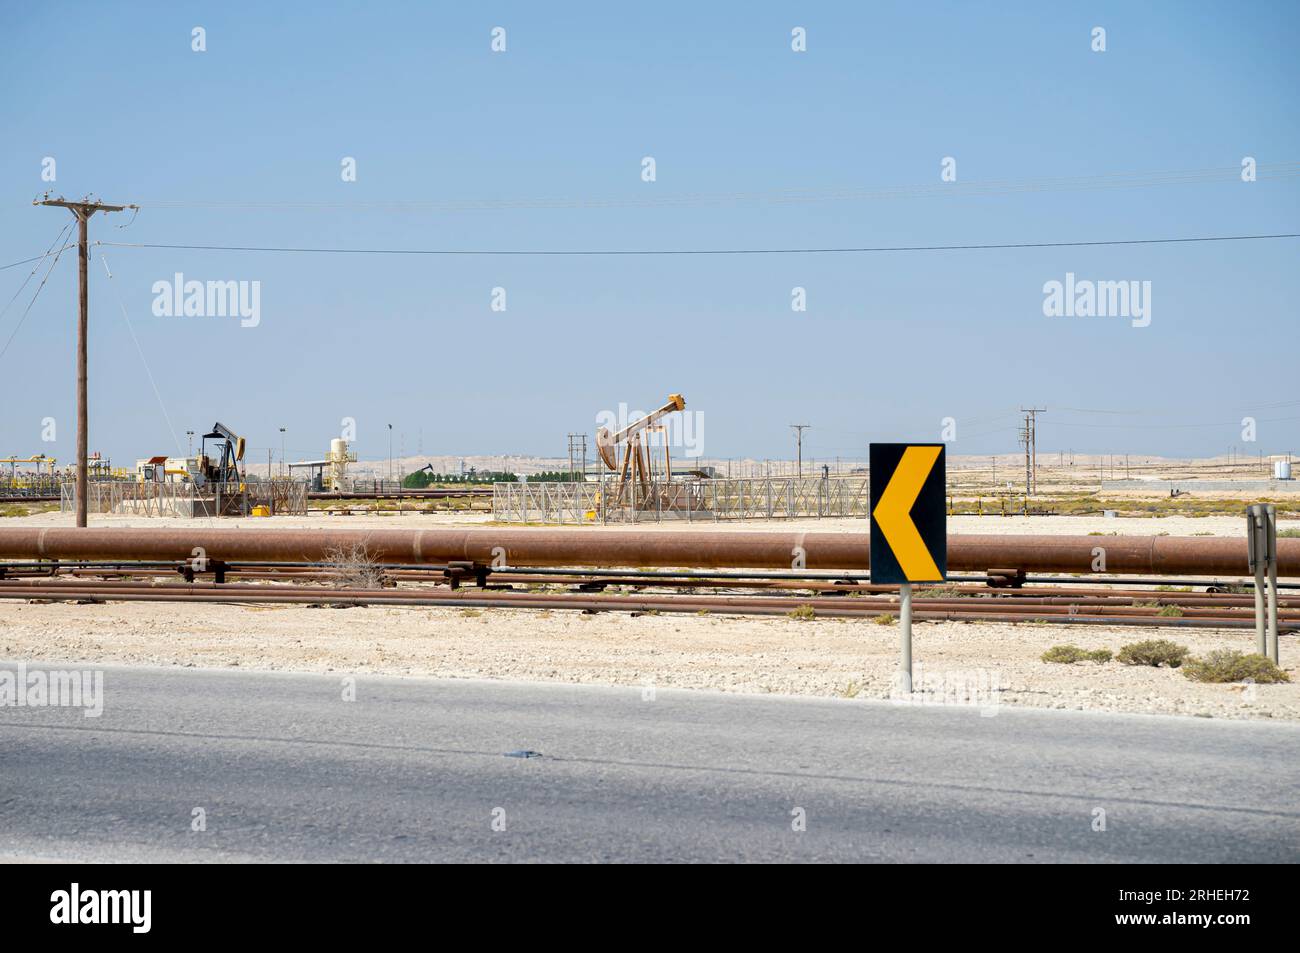 Bahrain oil field infrastructure -  oil pipes, pump jack,oil horse, oil jack, beam pump extracting crude oil from oil wells. Road sign Stock Photo